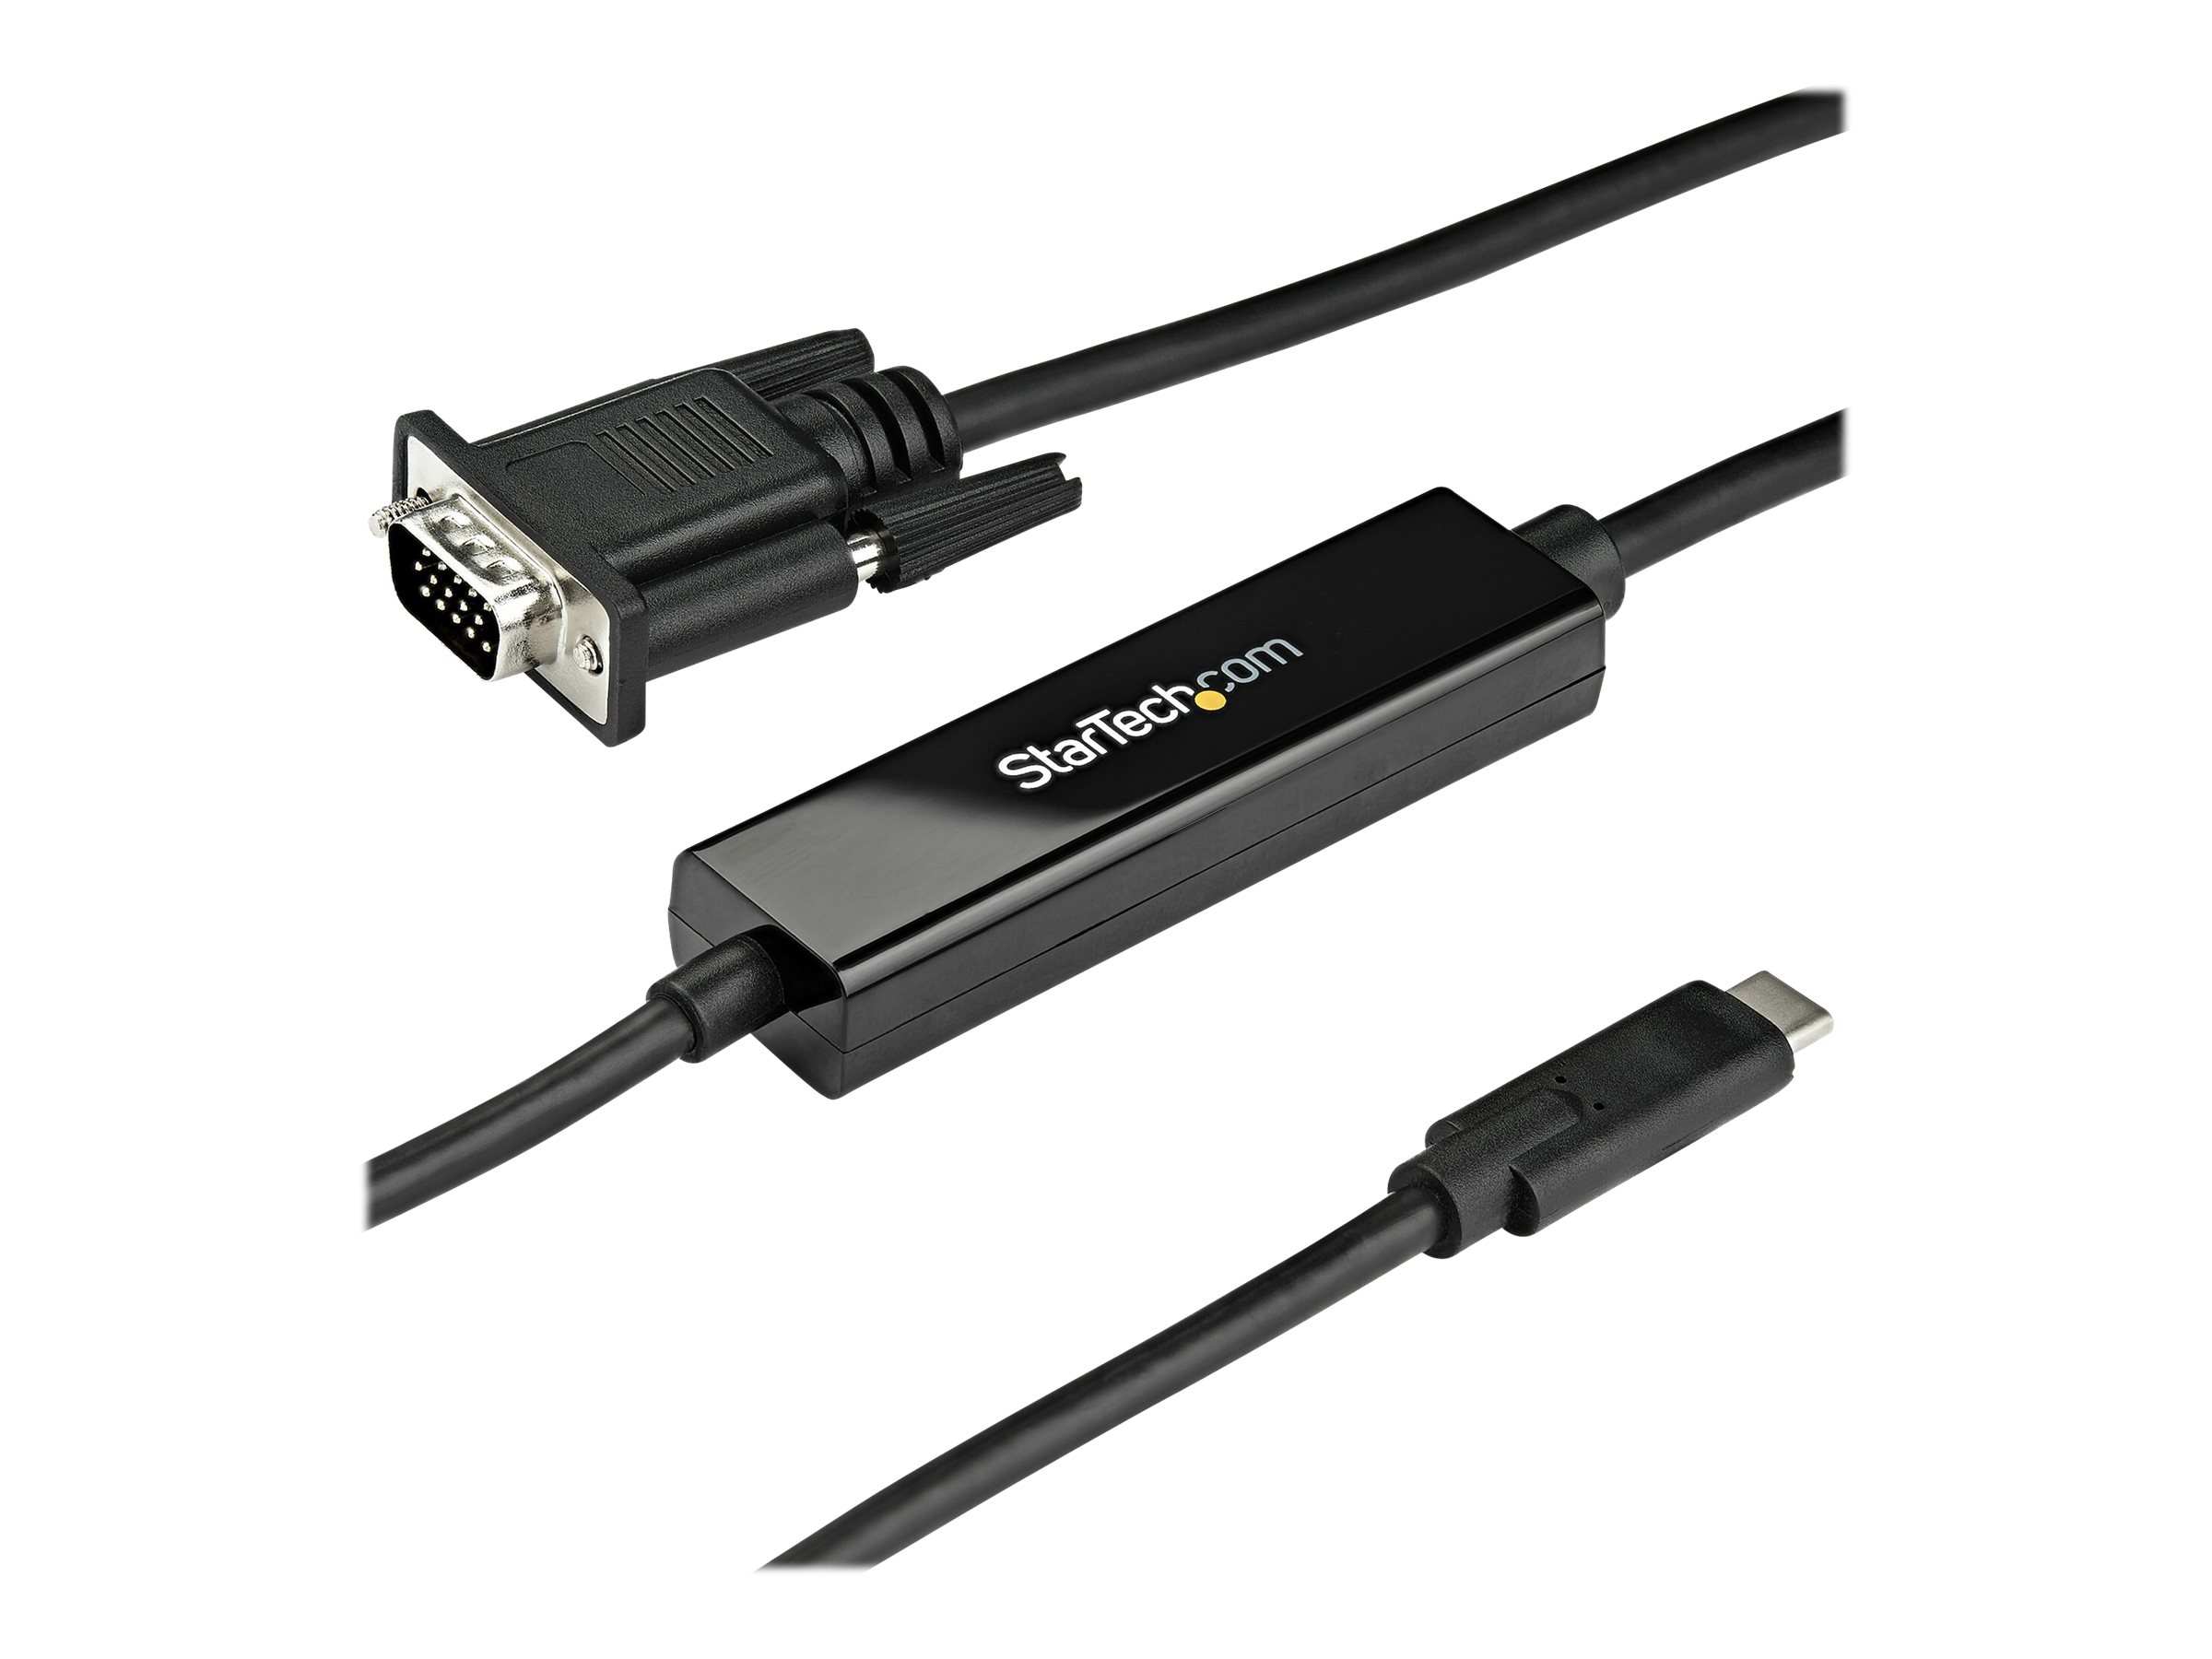 StarTech.com 3ft (1m) USB C to VGA Cable, 1920x1200/1080p USB Type C to VGA Video Active Adapter Cable, Thunderbolt 3 to VGA Monitor/ Projector, DP Alt Mode HBR2 Cable www.publicsector.shidirect.com